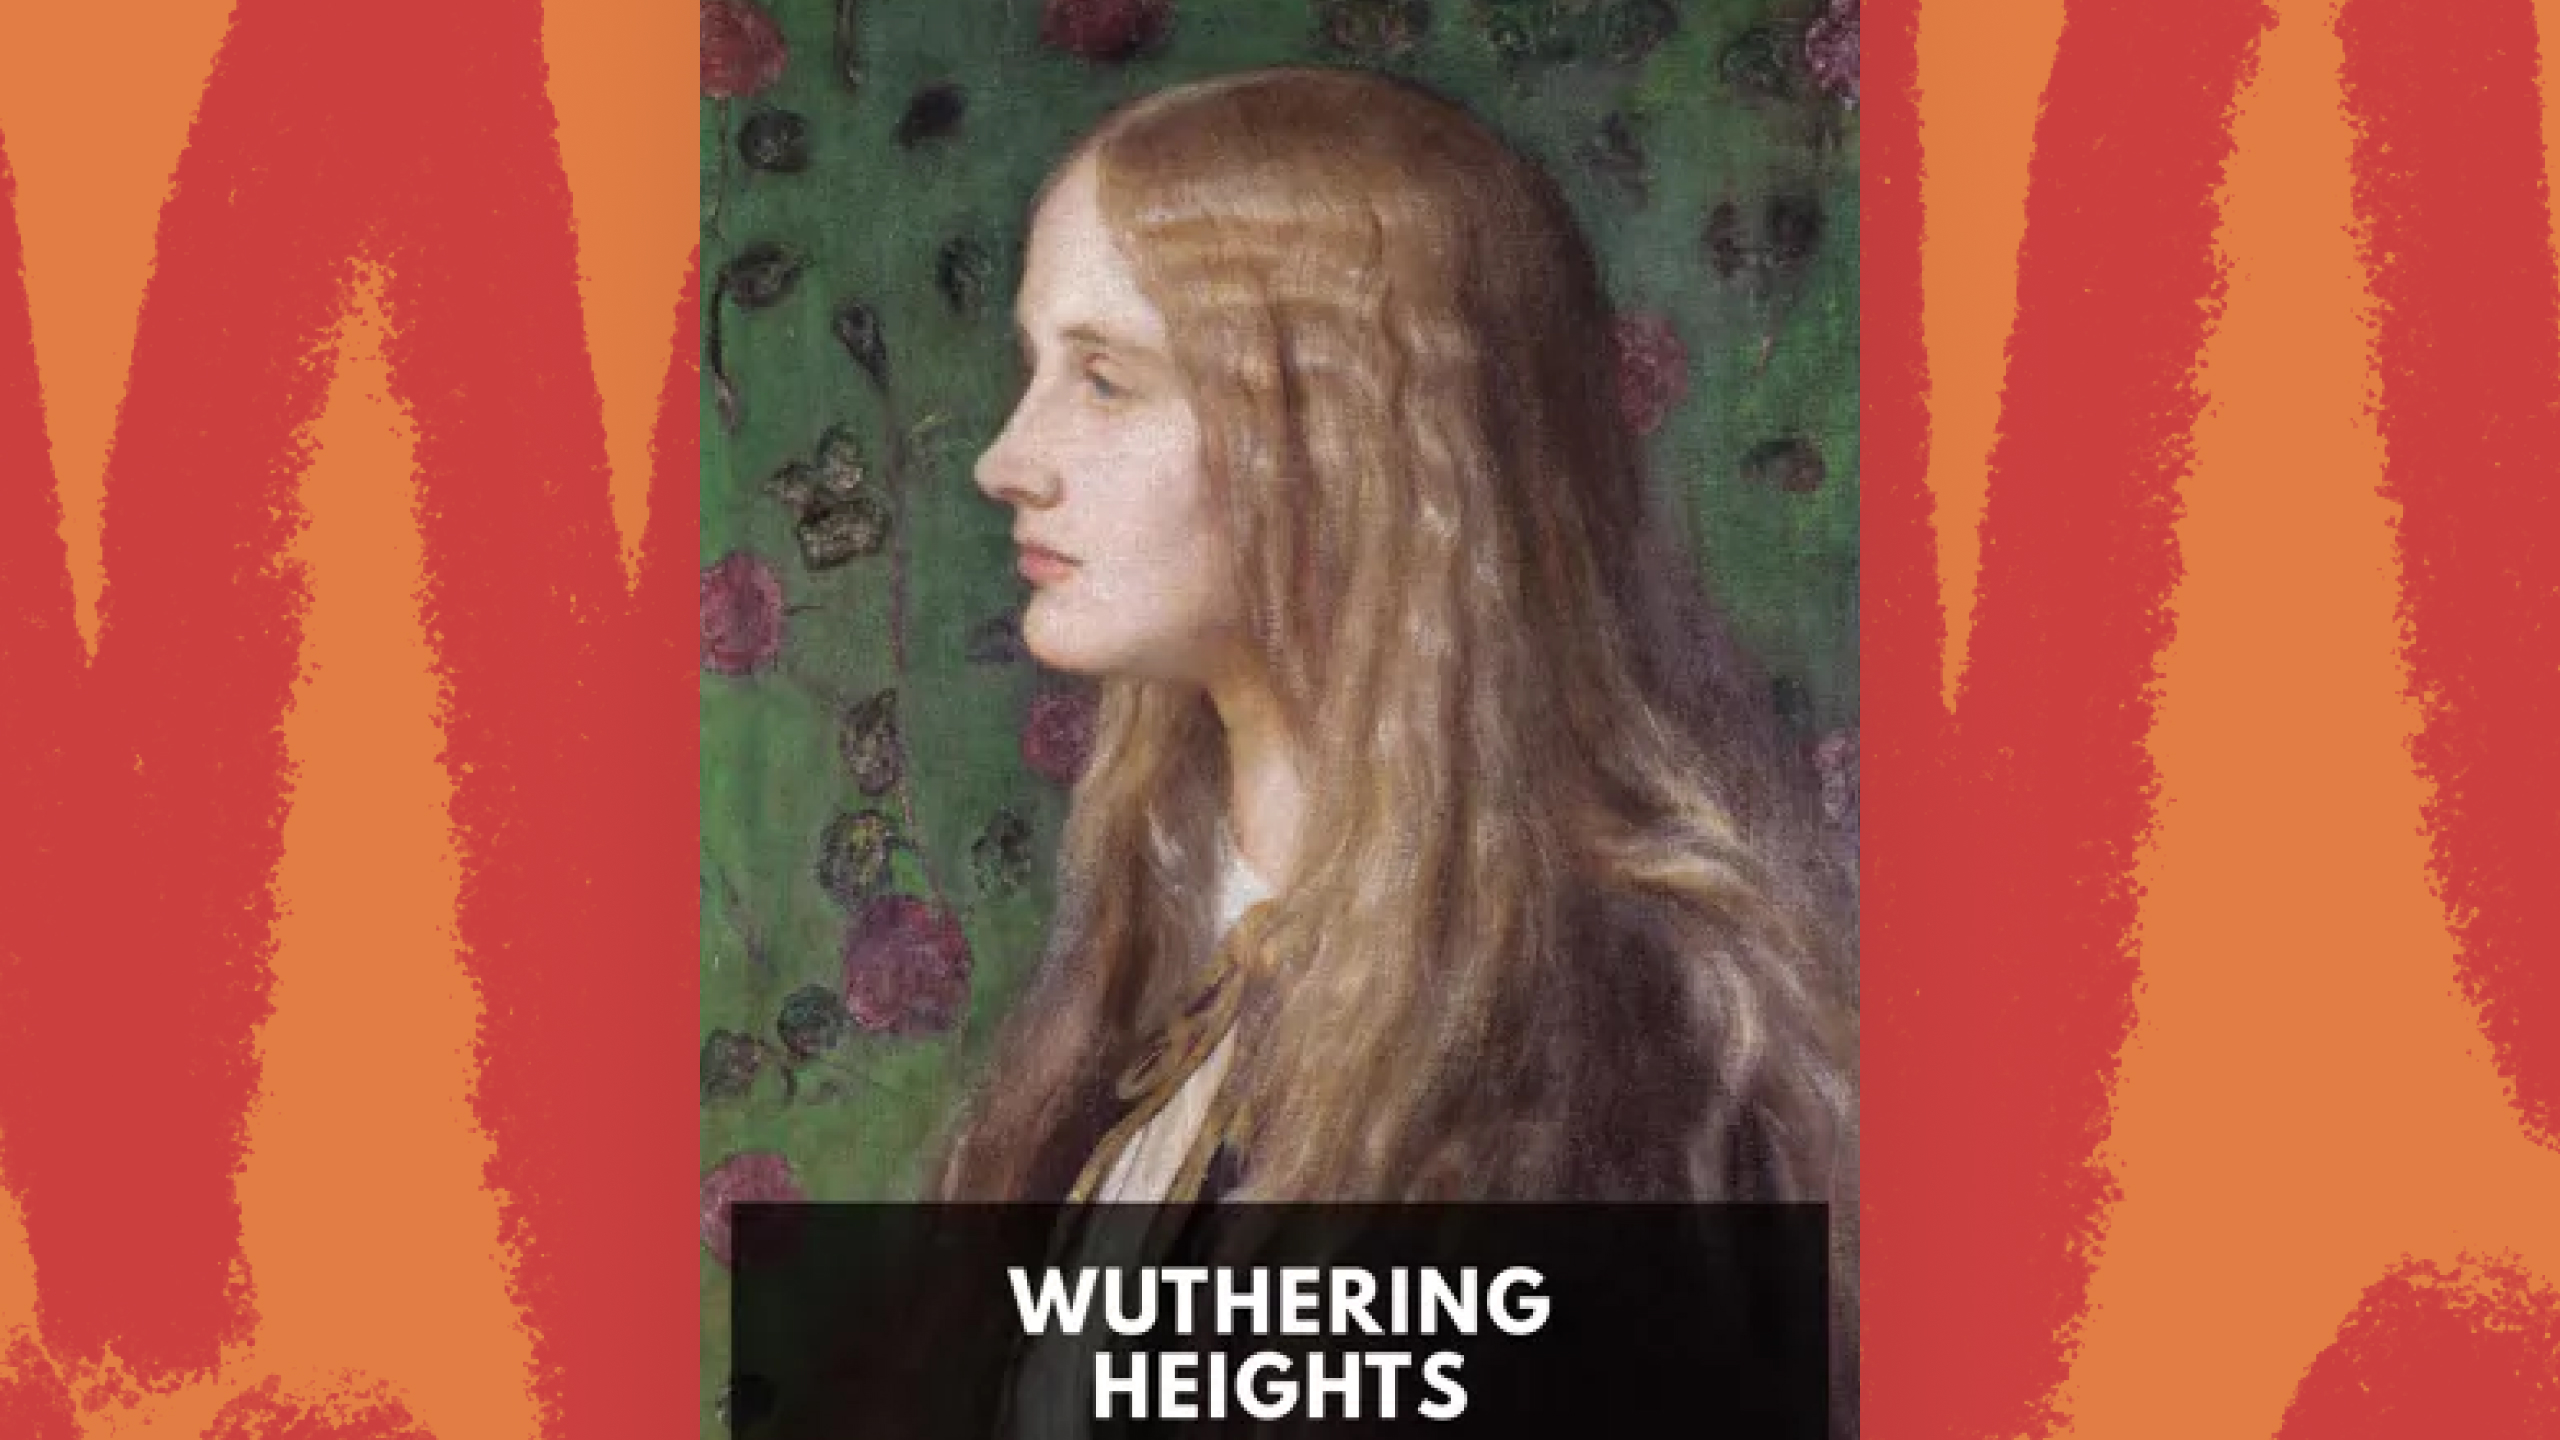 Wuthering Heights book club